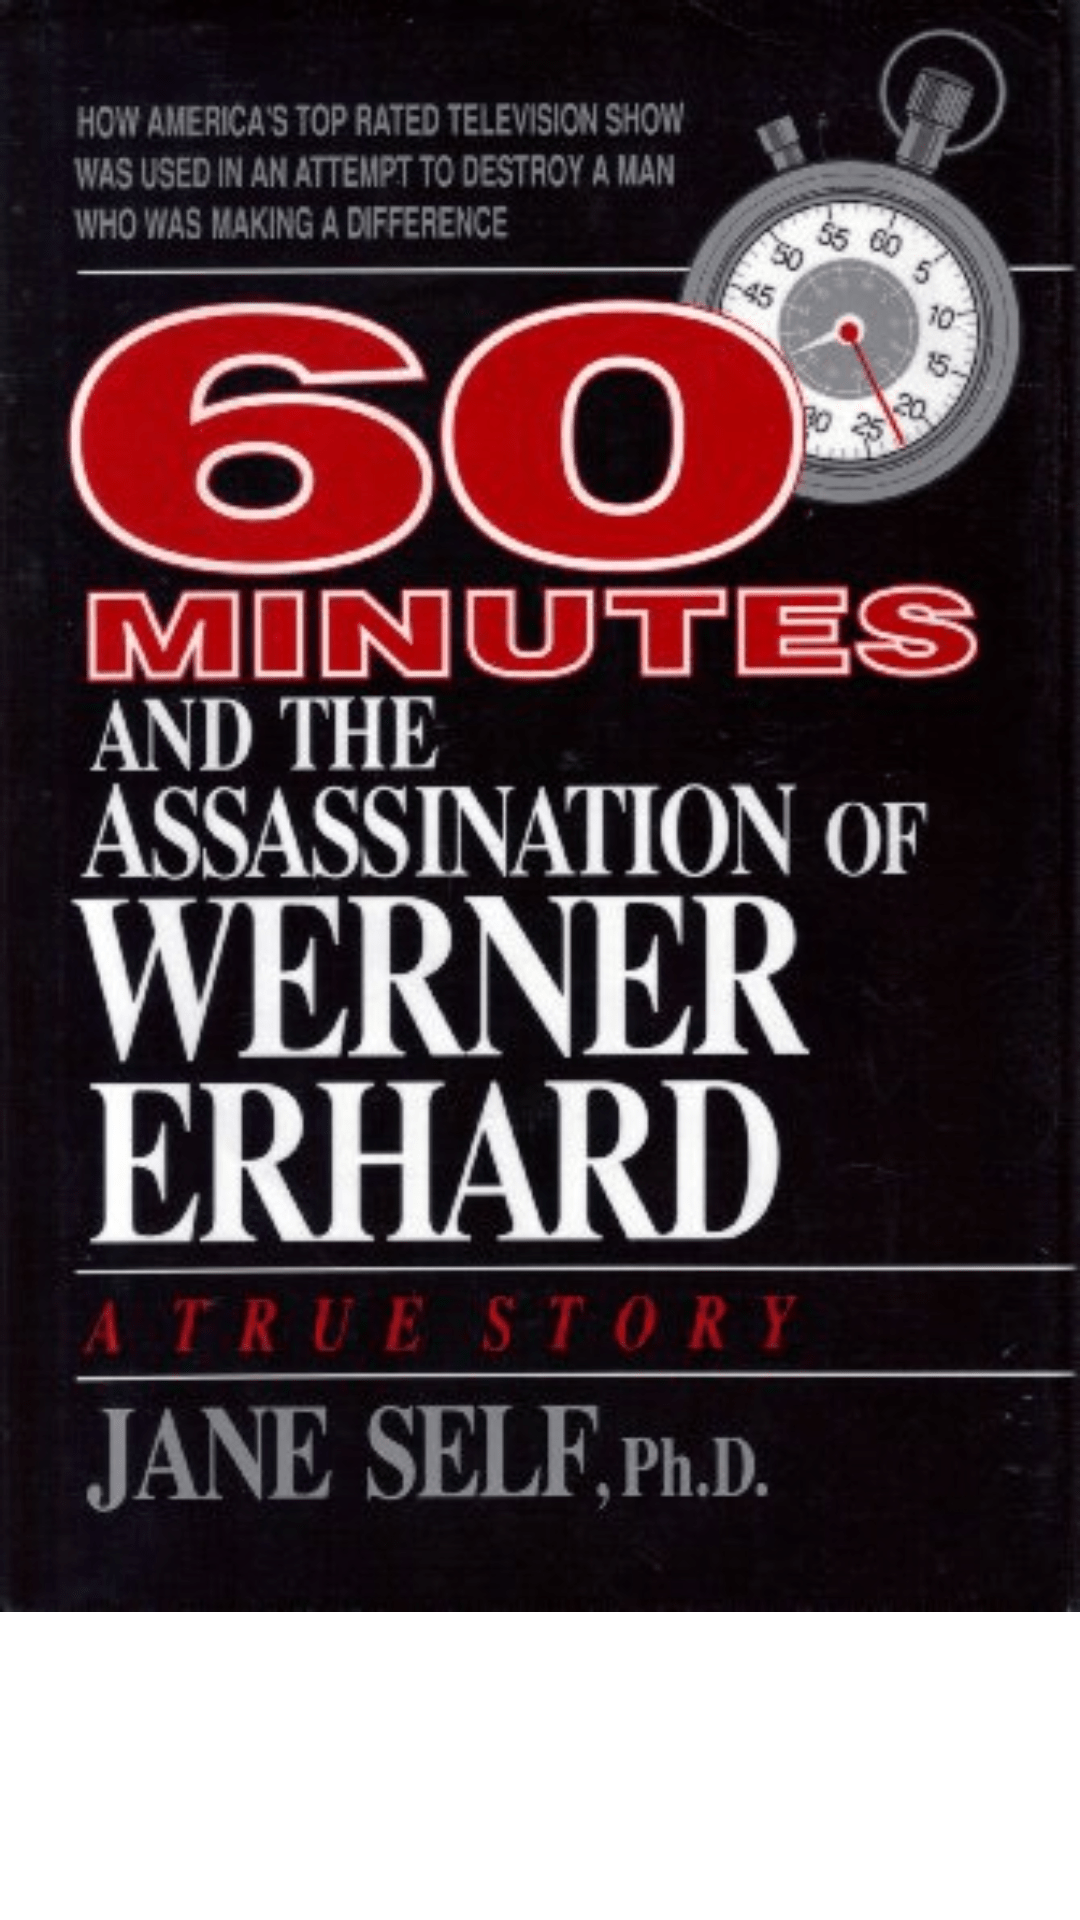 60 Minutes and the Assassination of Werner Erhard : How America's Top Rated Television Show Was Used in an Attempt to Destroy a Man Who Was Making a Difference